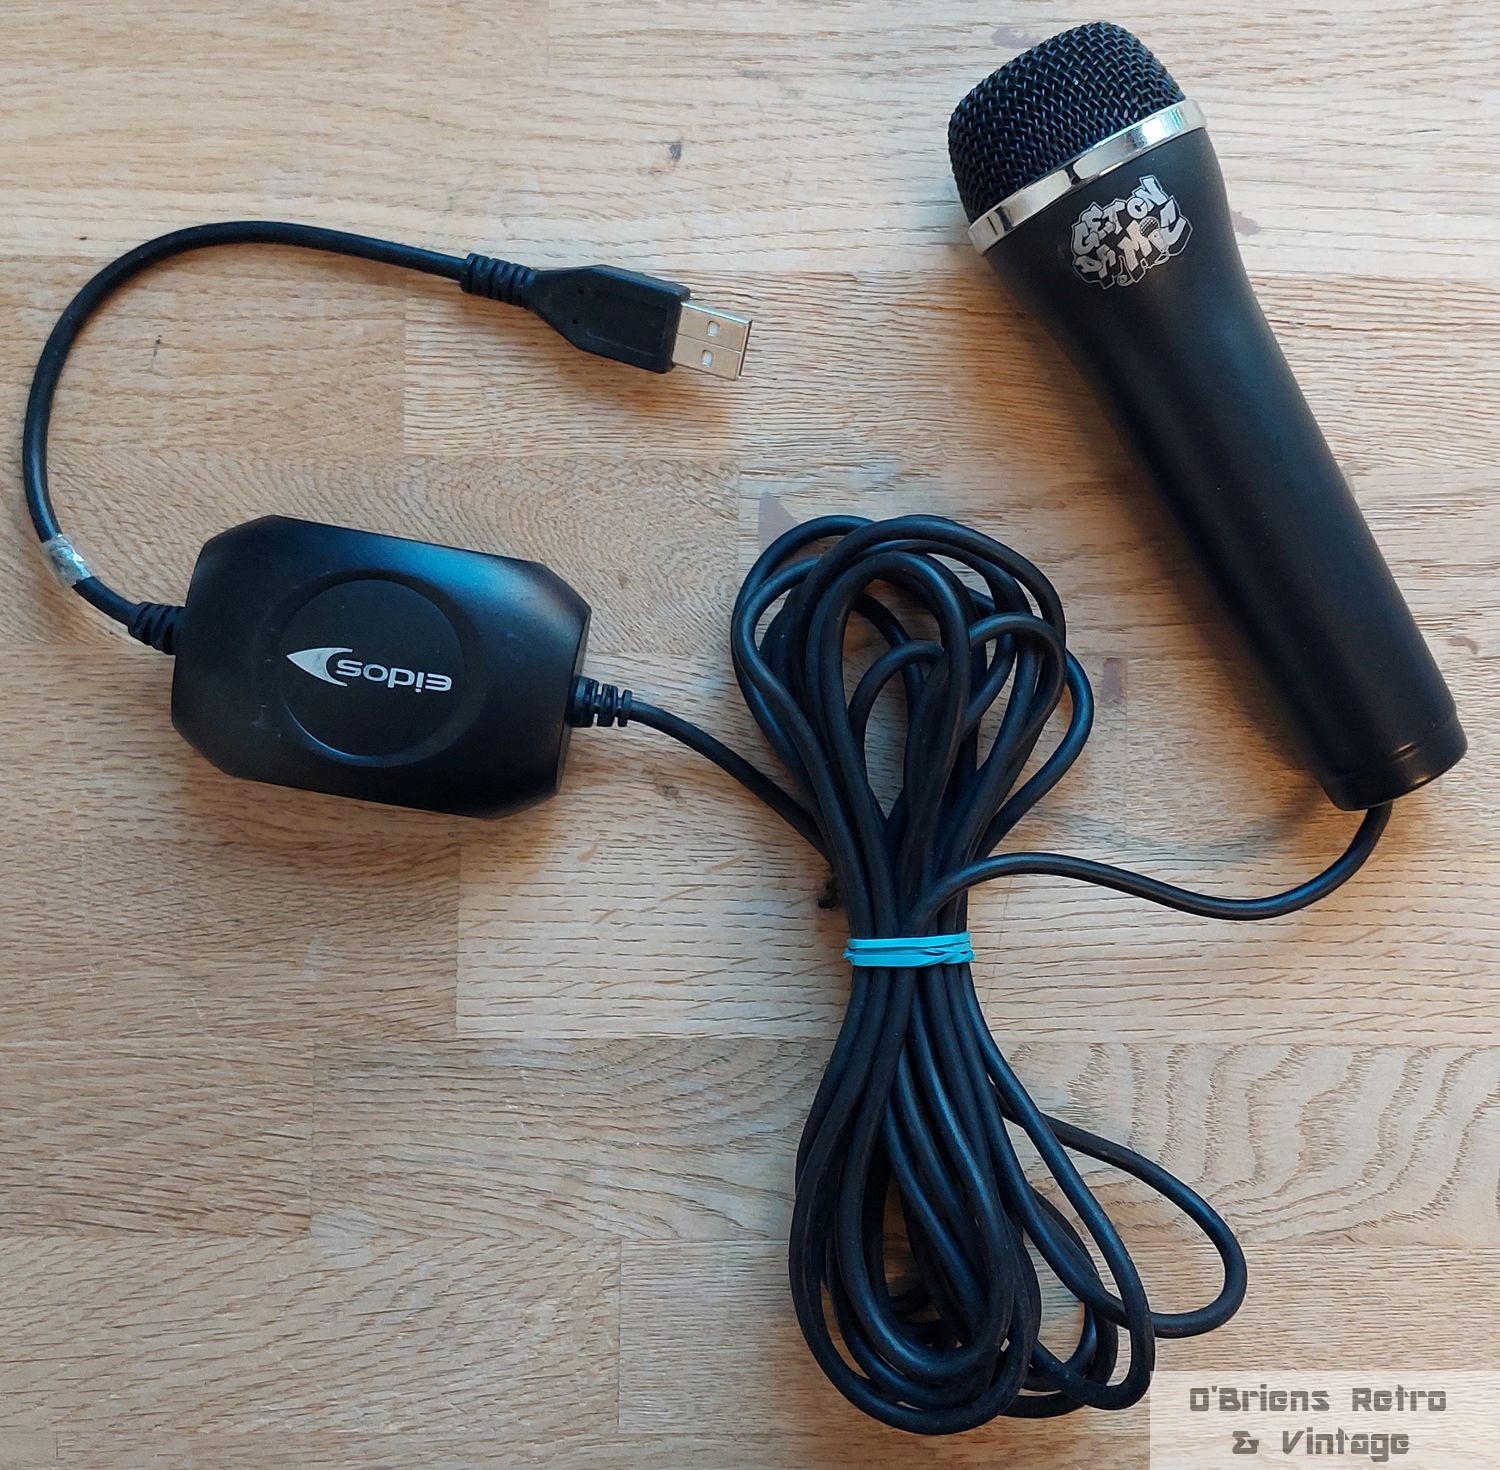 Rock Band Microphone - Logitech - Wii - Xbox - PS3 - PS4 - O'Briens & Vintage